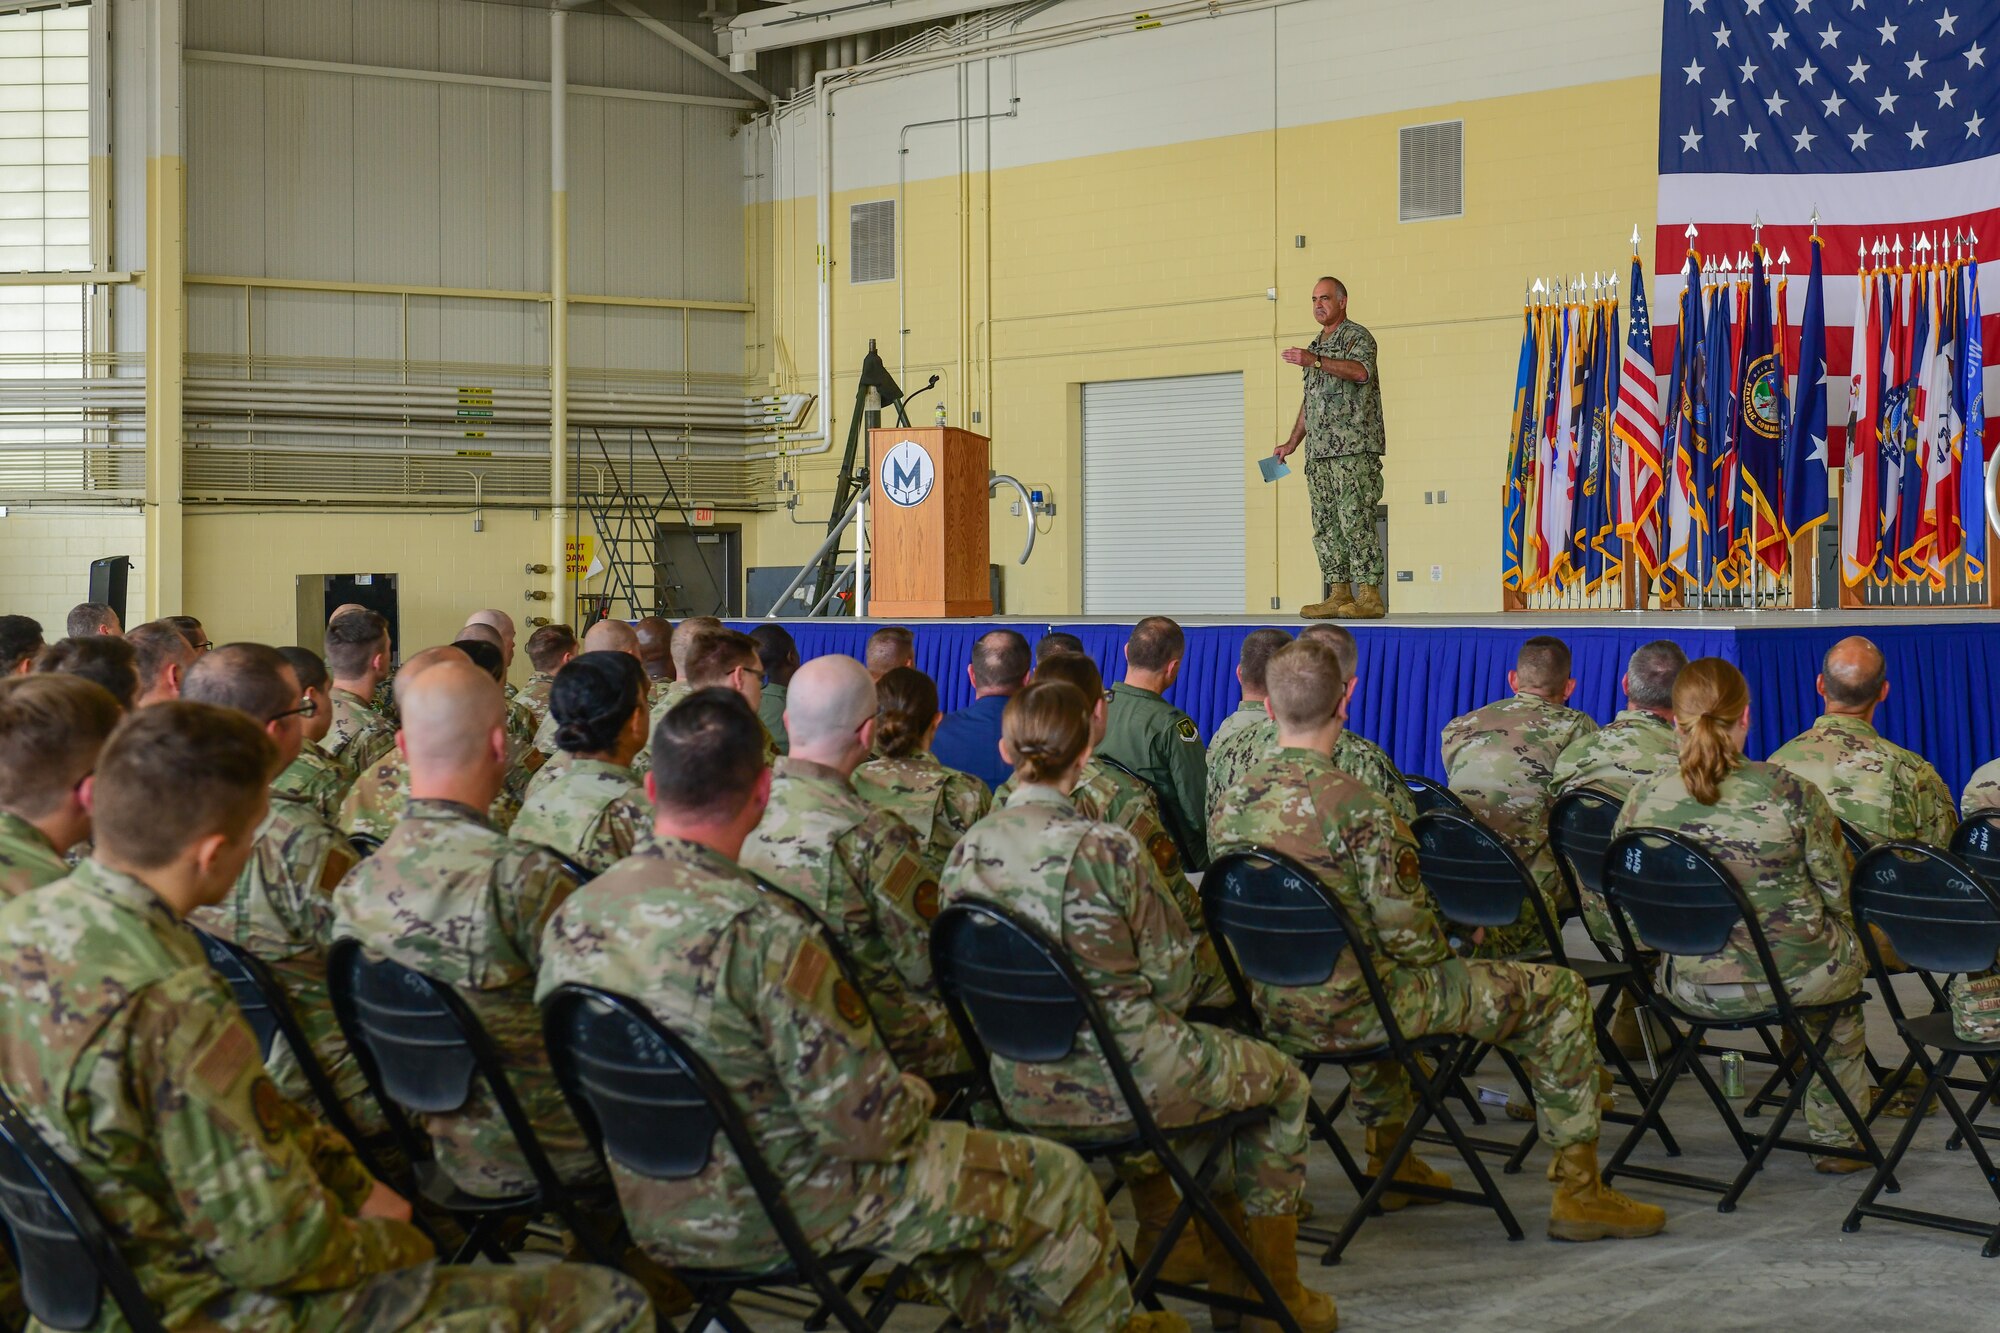 Adm. Charles Richard, United States Strategic Command commander, speaks at an all-call on Minot Air Force Base, North Dakota, Aug. 18, 2022. During the all call, Adm. Richard stressed the importance of Minot AFB providing two legs of the nation's nuclear triad, while answering questions from Airmen. (U.S. Air Force photo by Airmen Alysa Knott)